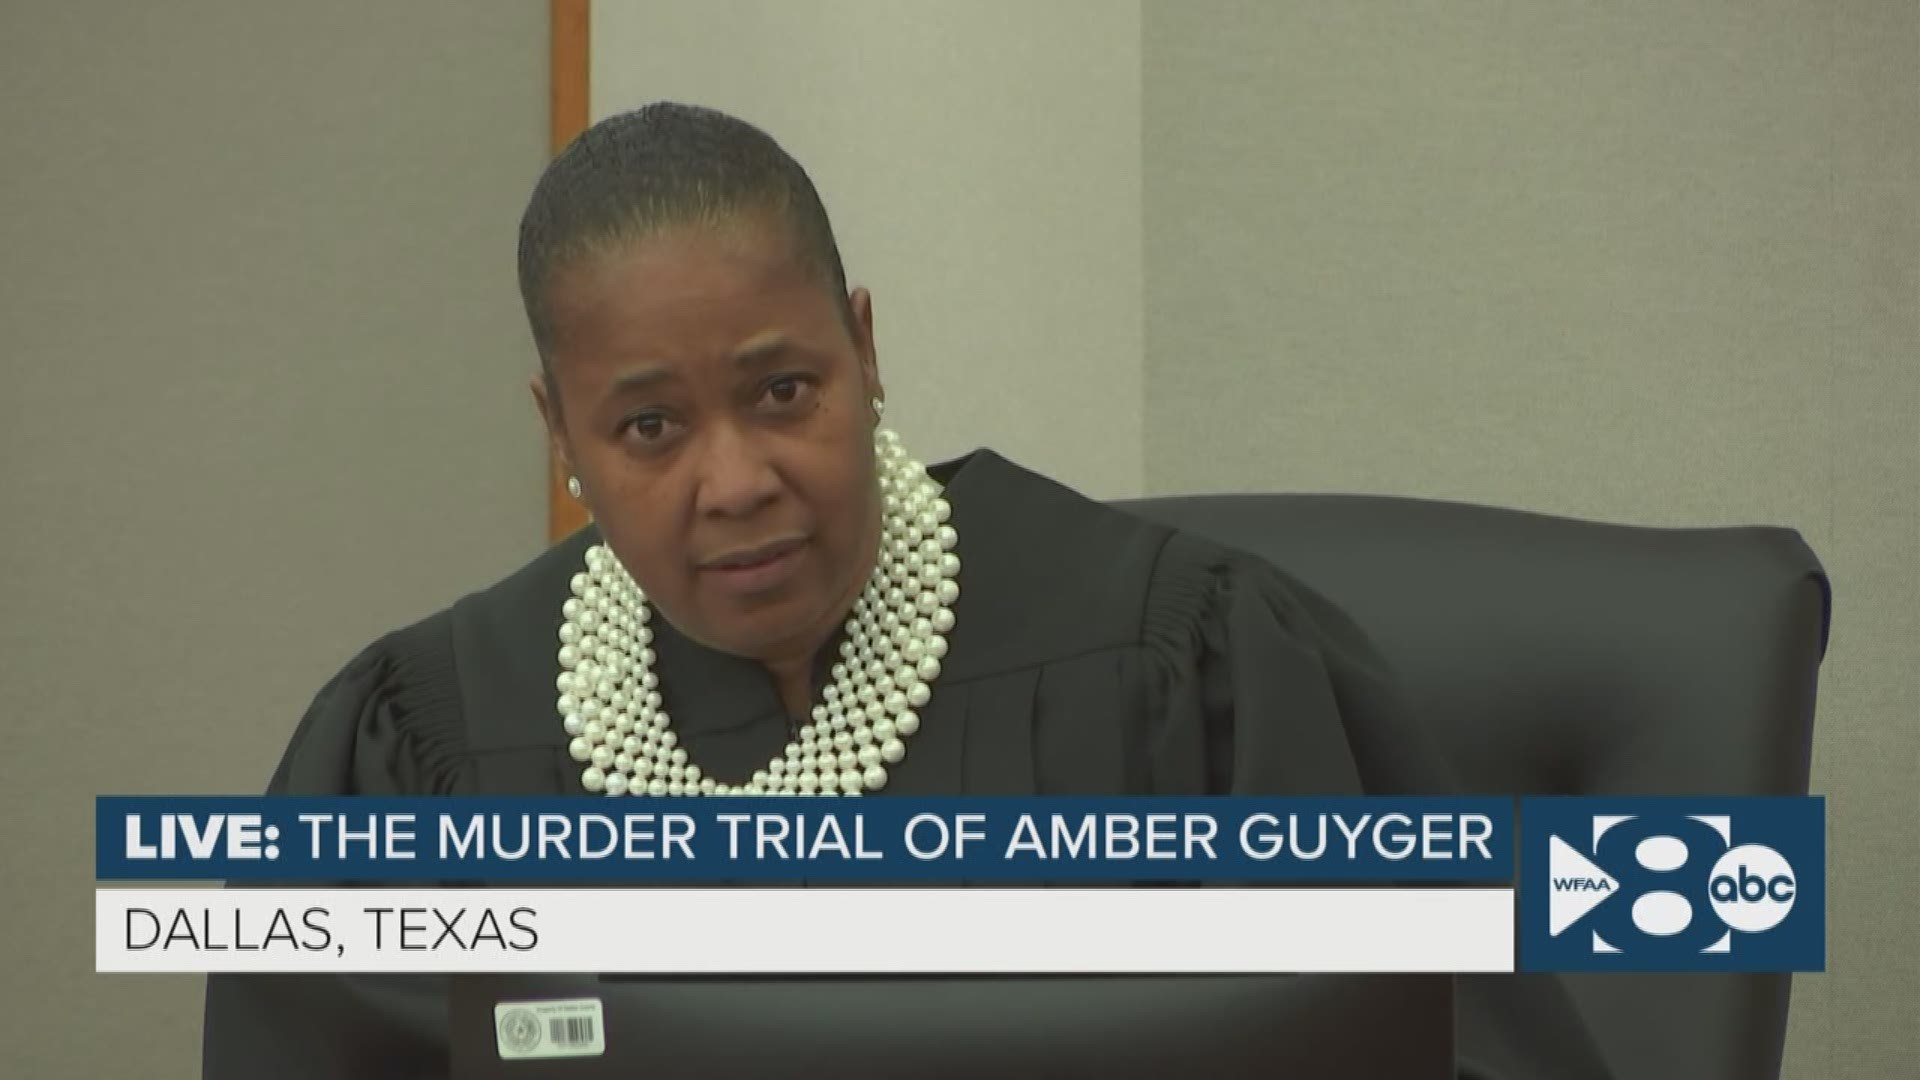 Dallas County DA John Creuzot gave a local TV interview that aired the night before the trial for Amber Guyger got underway. In it, he spoke of the trial.